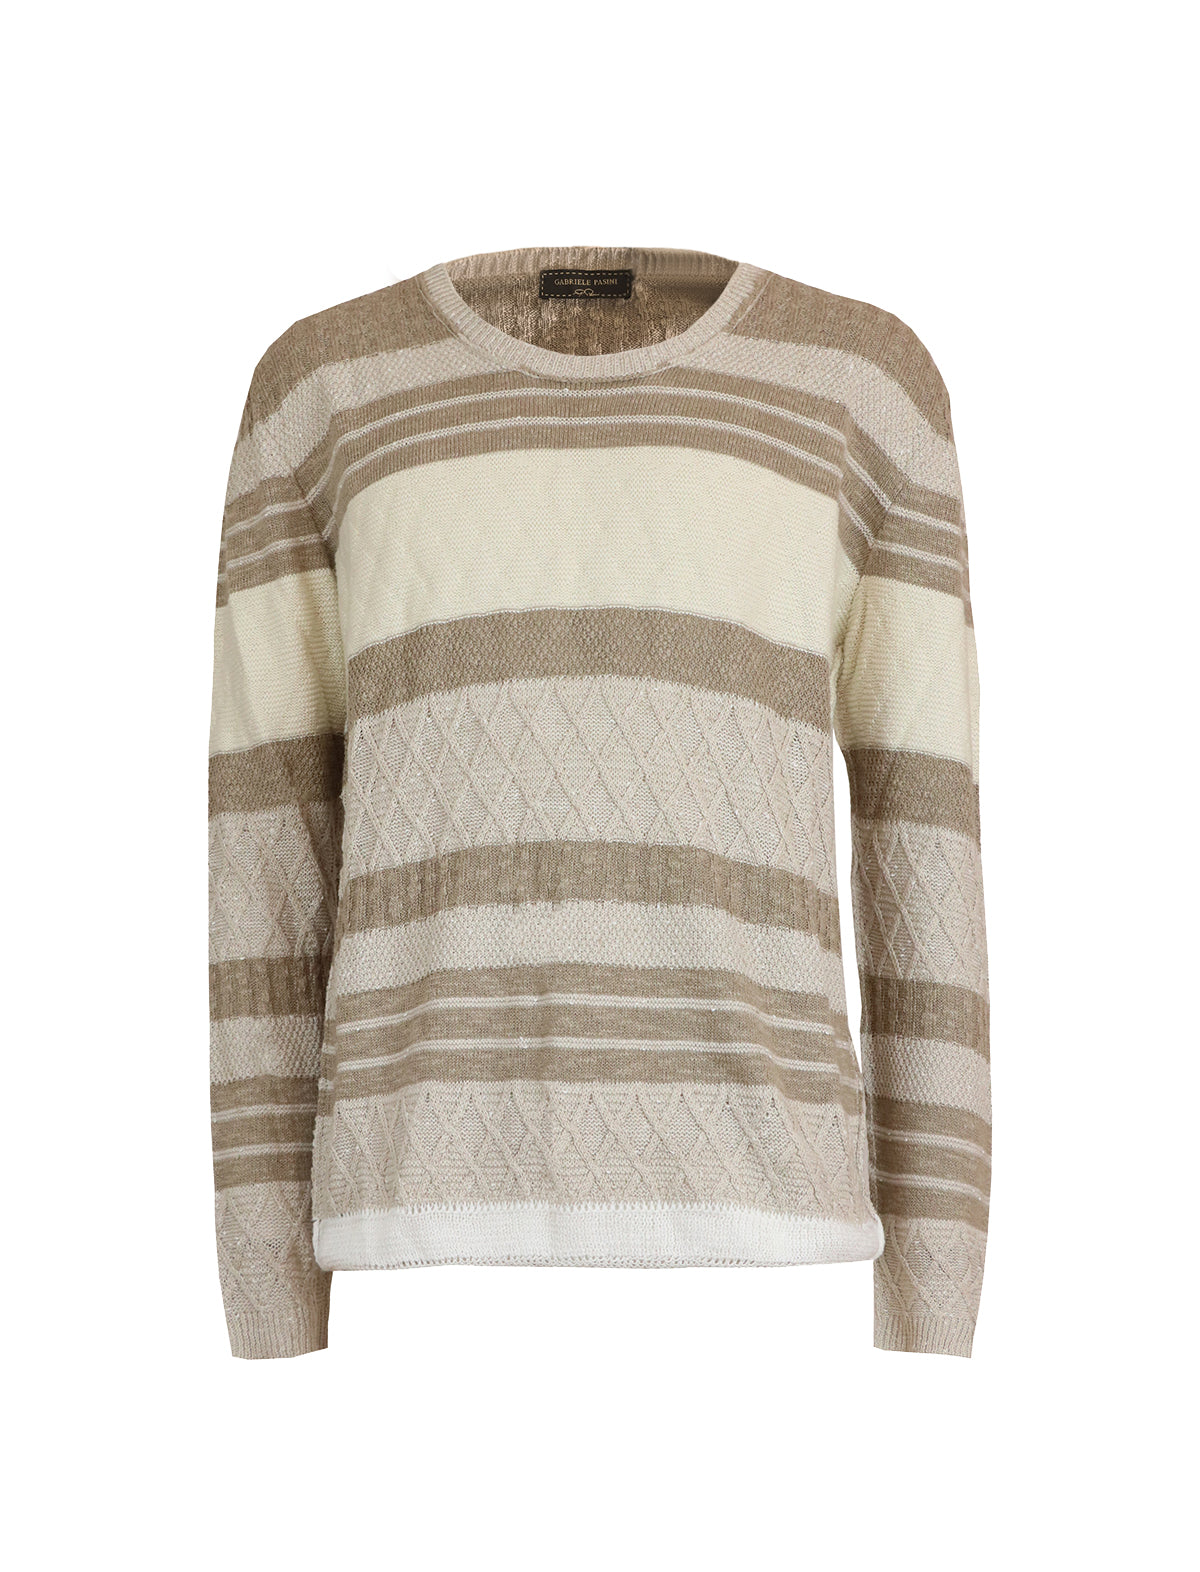 Gabriele Pasini Cable Knit Sweater in Striped Brown